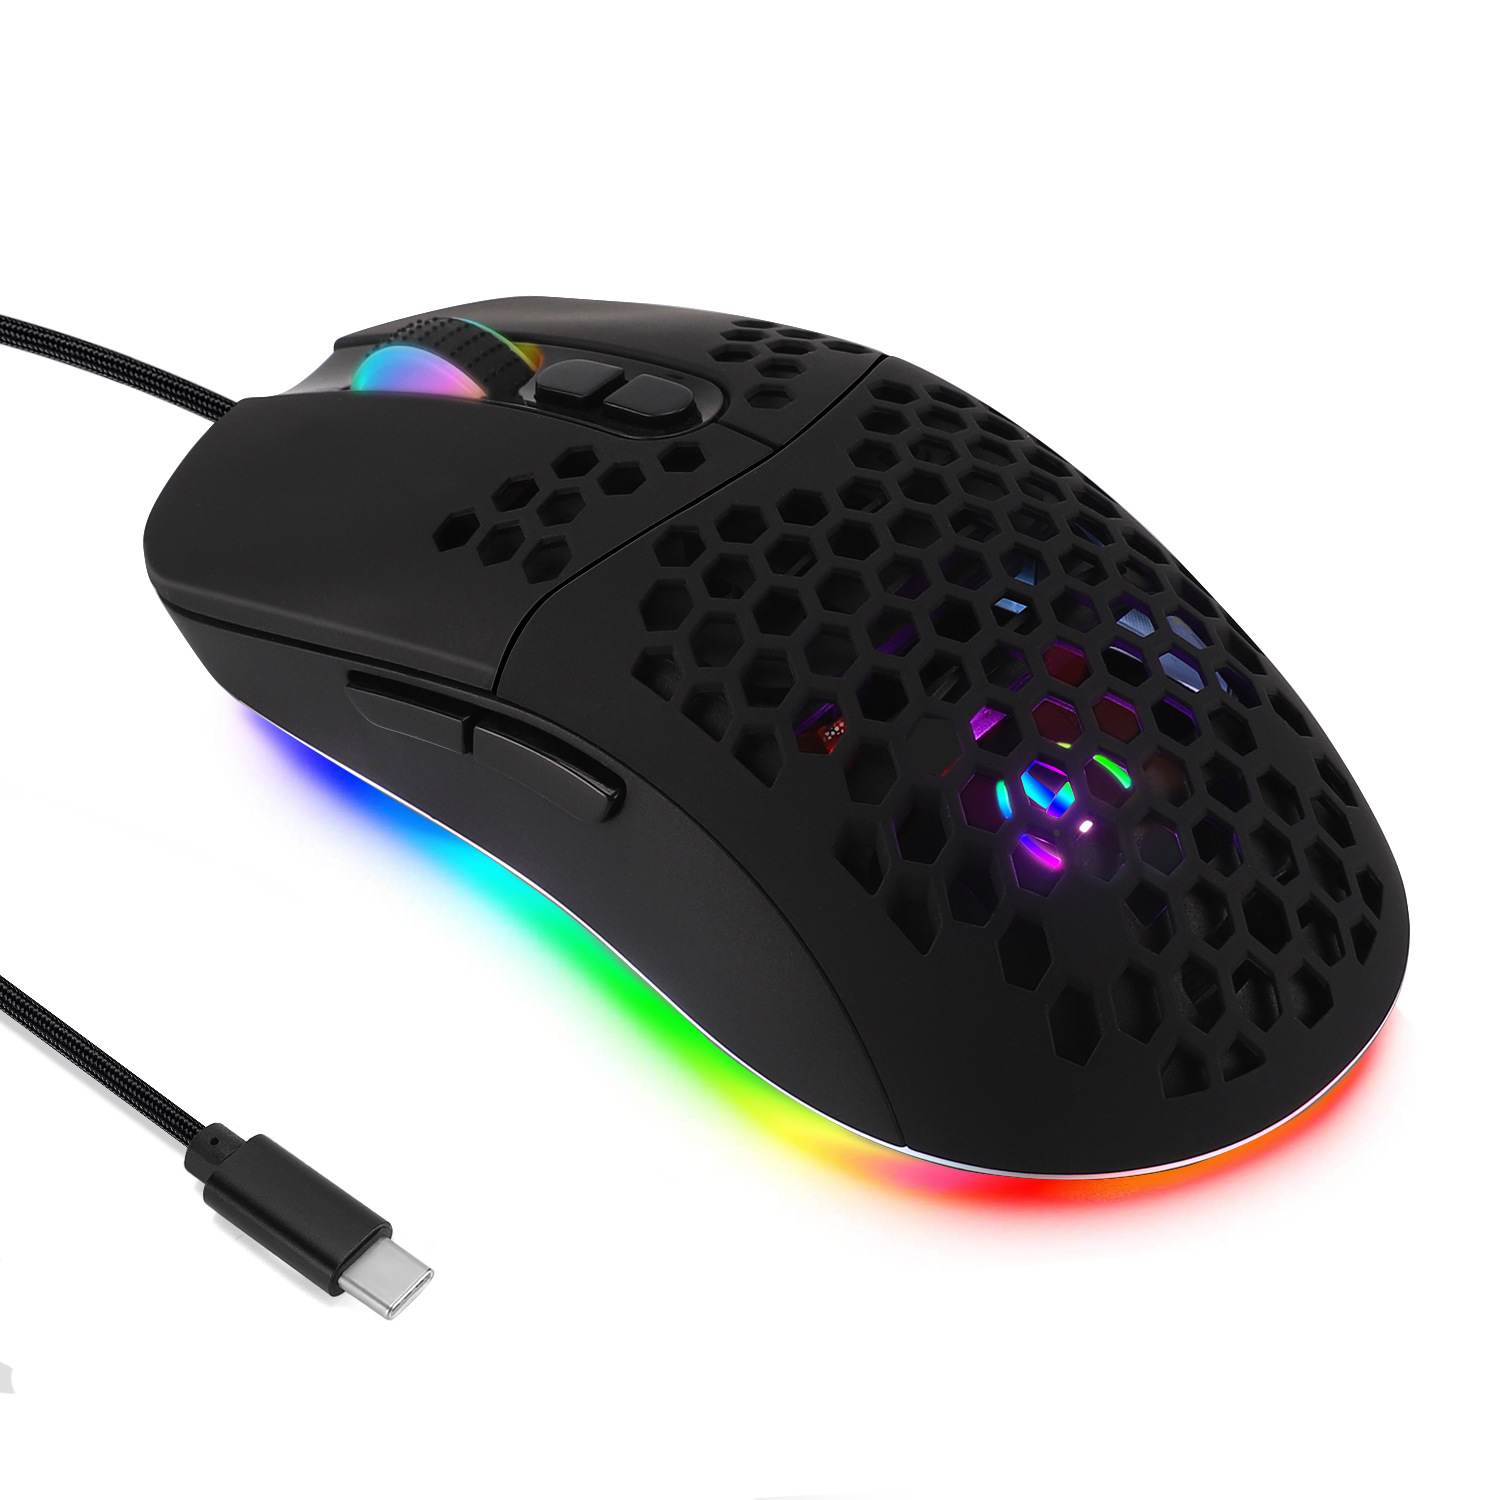 FRUITFUL Wired Gaming Mouse with USB C Port,7200 DPI RGB LED Honeycomb Mice,5 RGB Backlit Mouse with 7 Buttons Computer Gaming Mouse for PC Labtop Mac